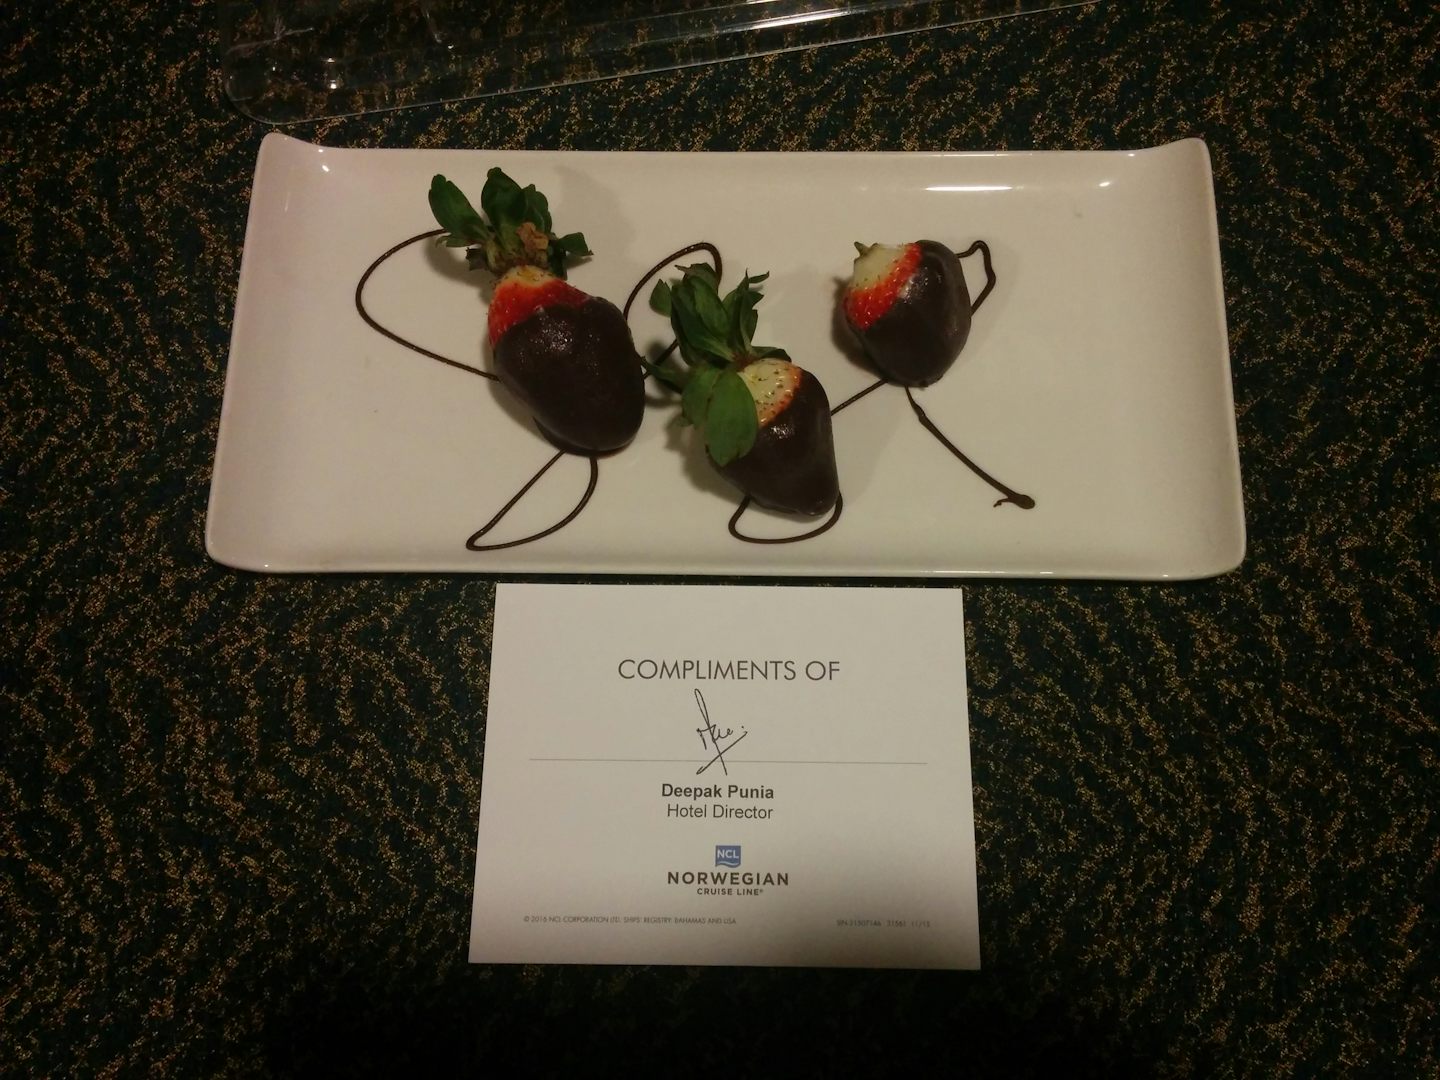 One of many delicious snacks sent to us from Deepak. Here is a pic of chocolate dipped strawberries, yummy!